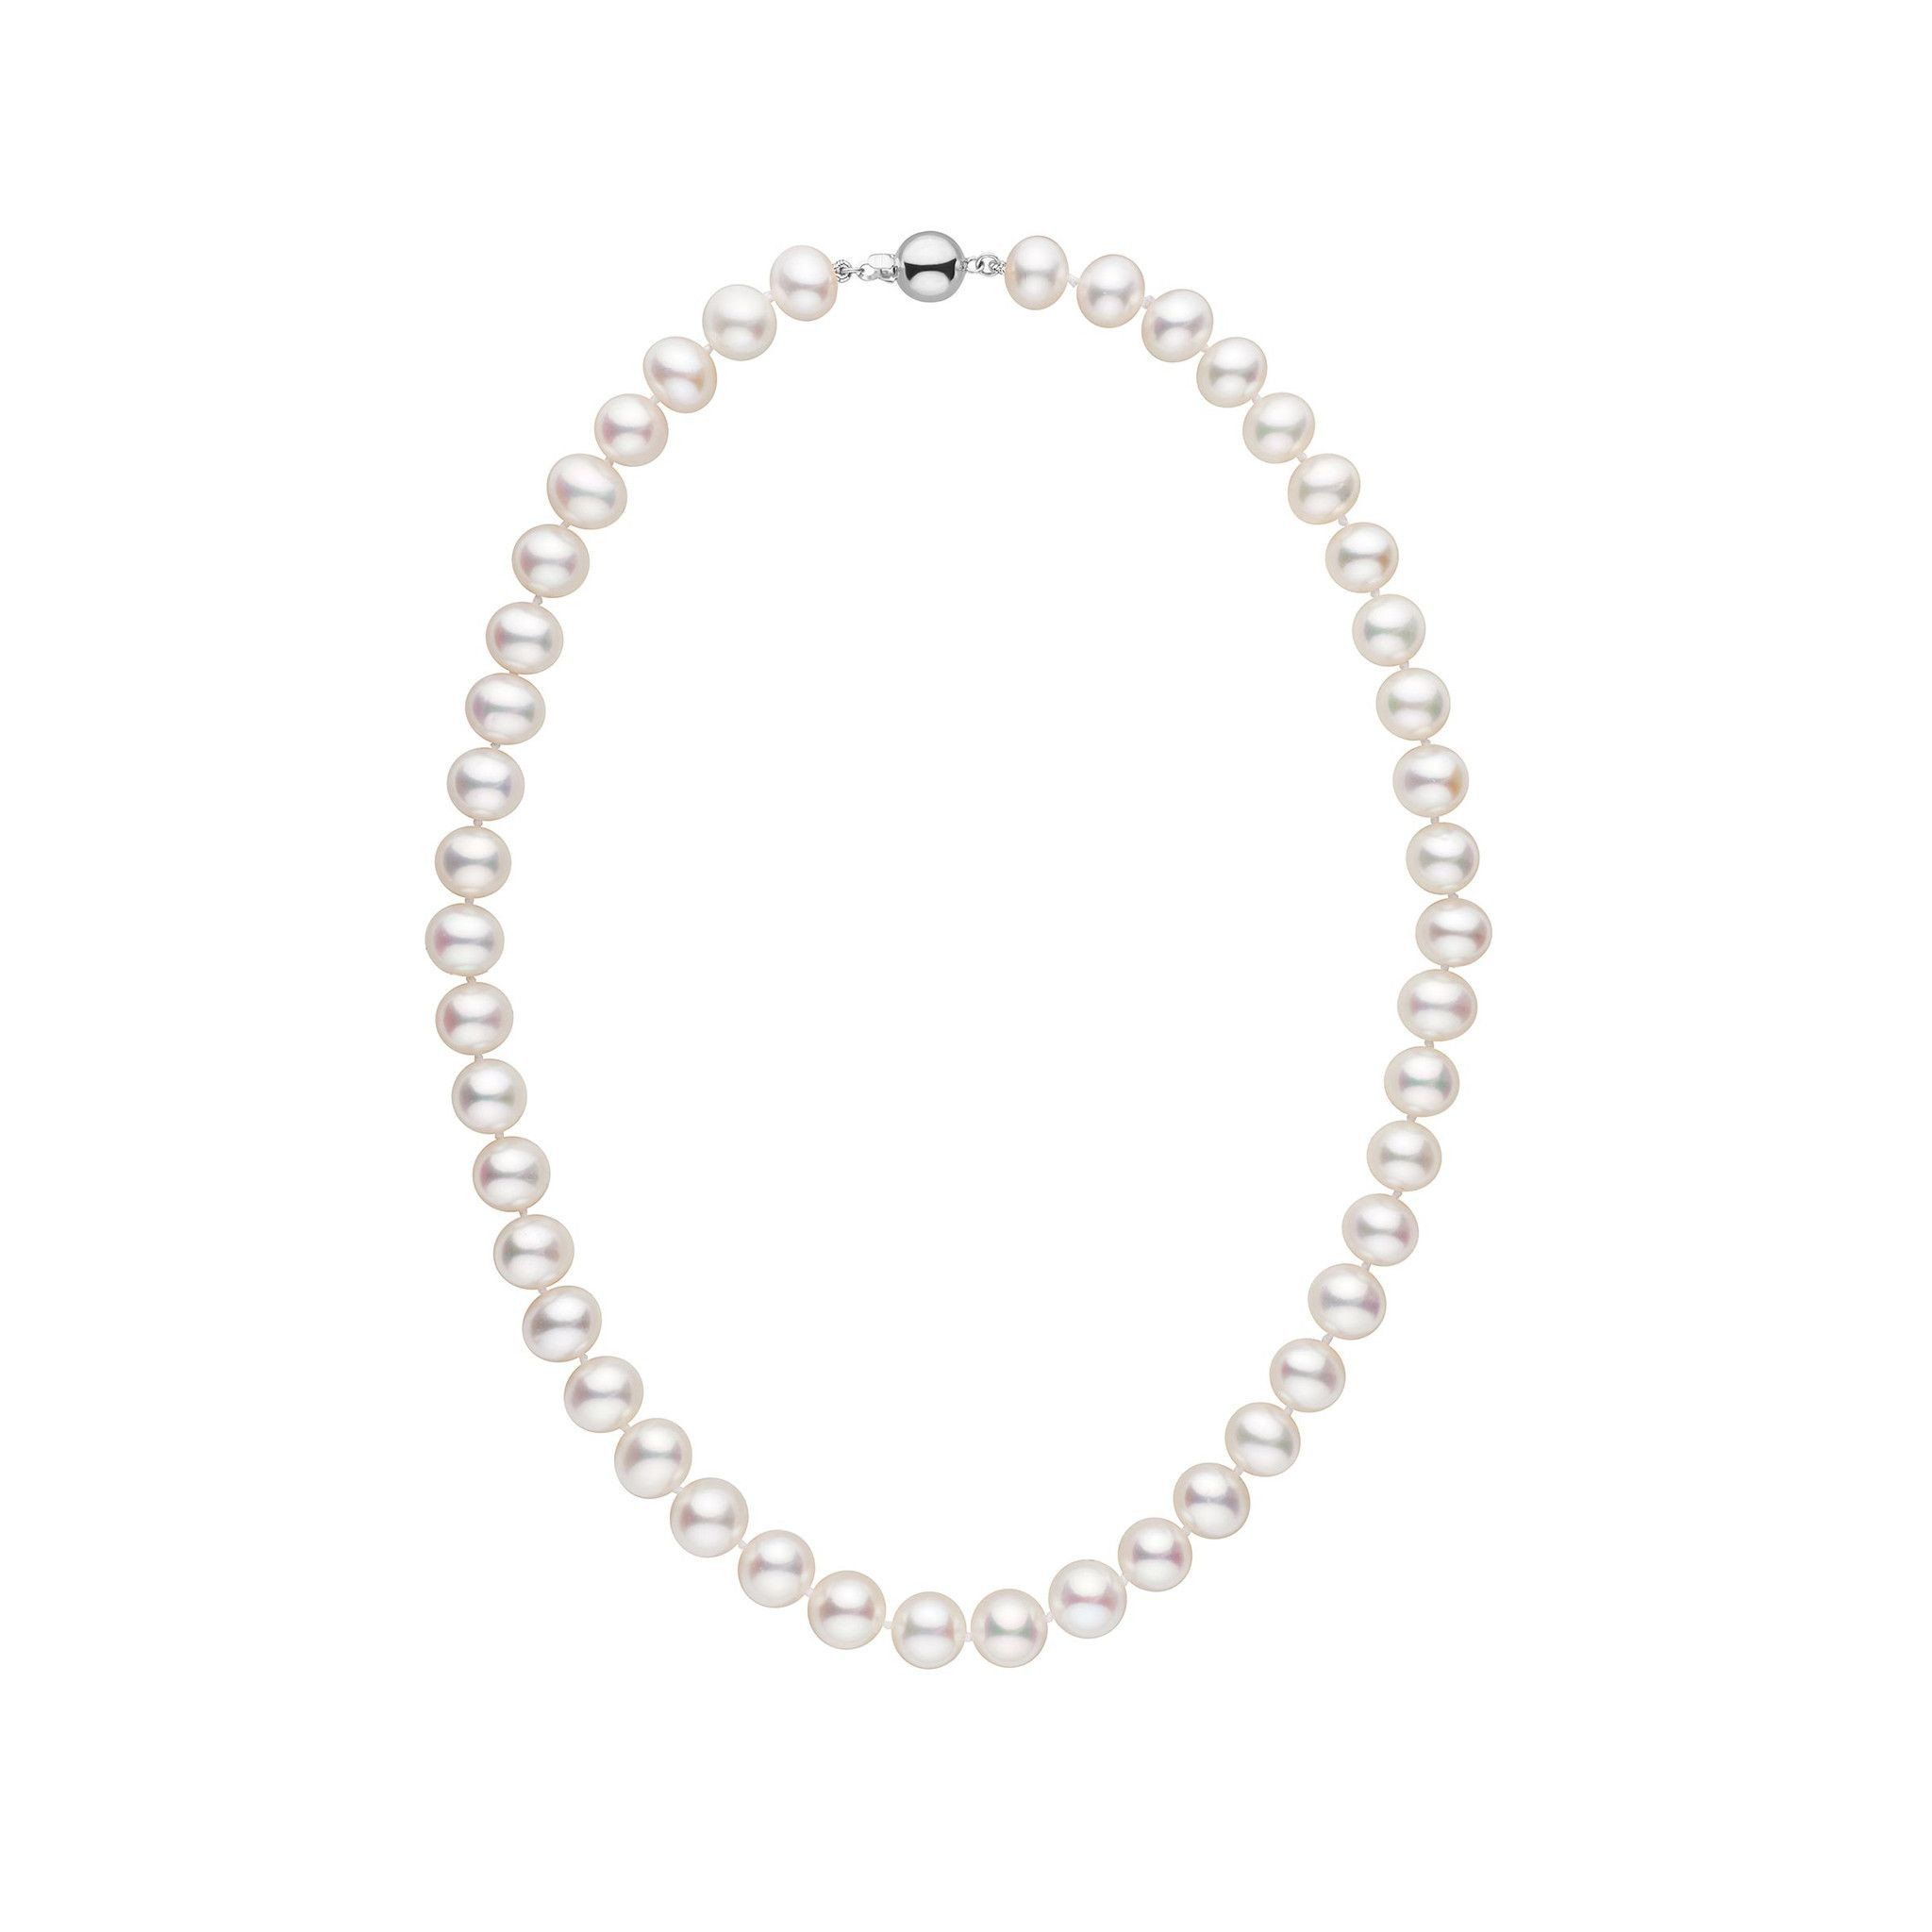 8.5-9.0 mm 16 Inch AA+ White Freshwater Pearl Necklace